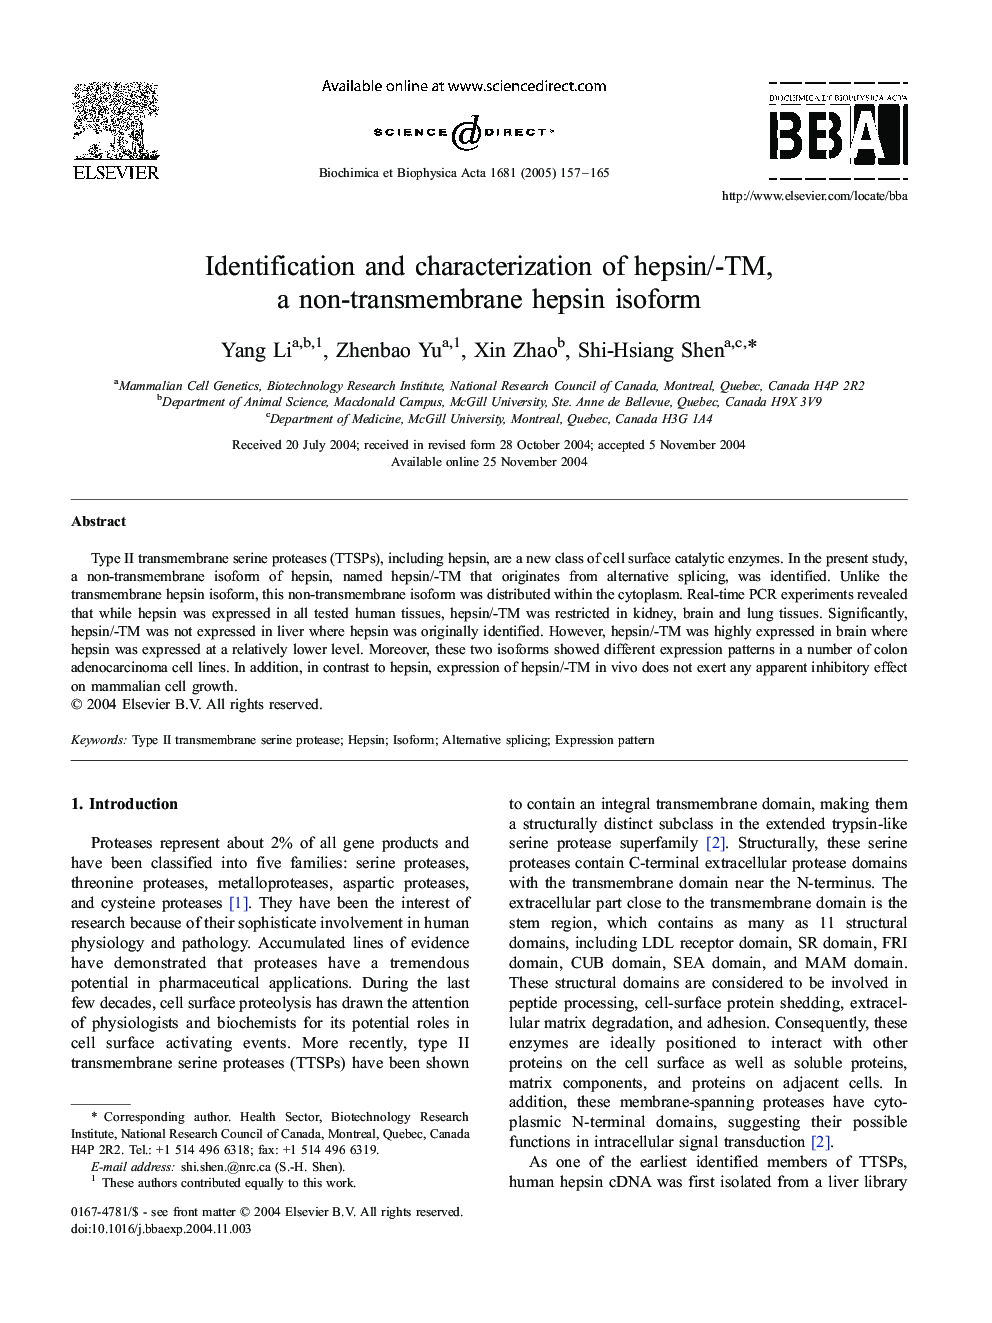 Identification and characterization of hepsin/-TM, a non-transmembrane hepsin isoform